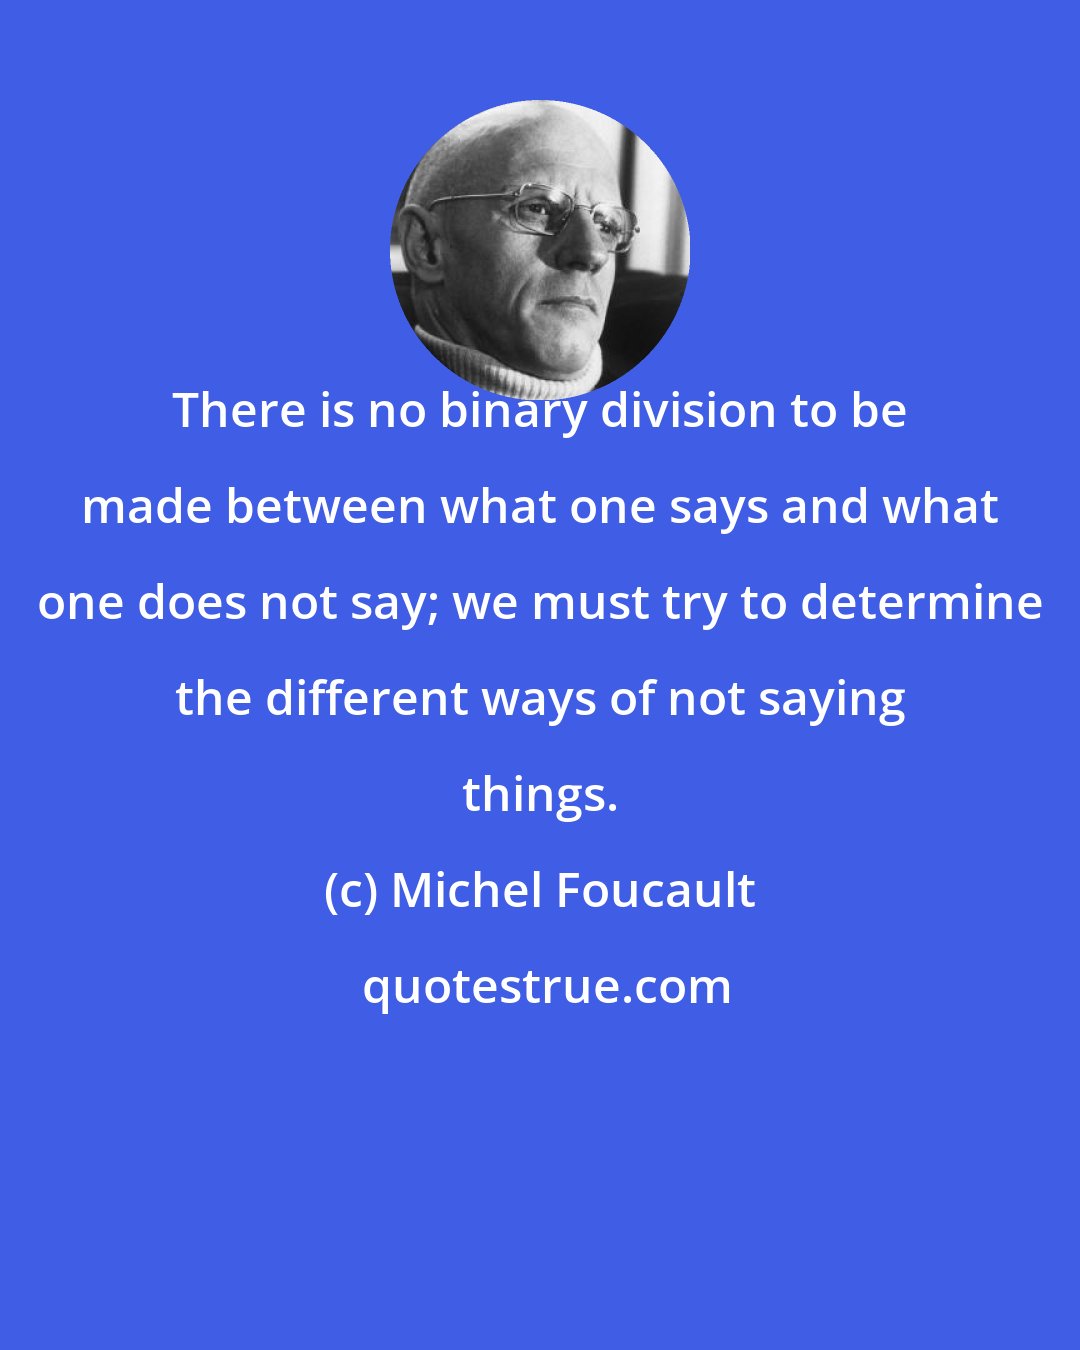 Michel Foucault: There is no binary division to be made between what one says and what one does not say; we must try to determine the different ways of not saying things.